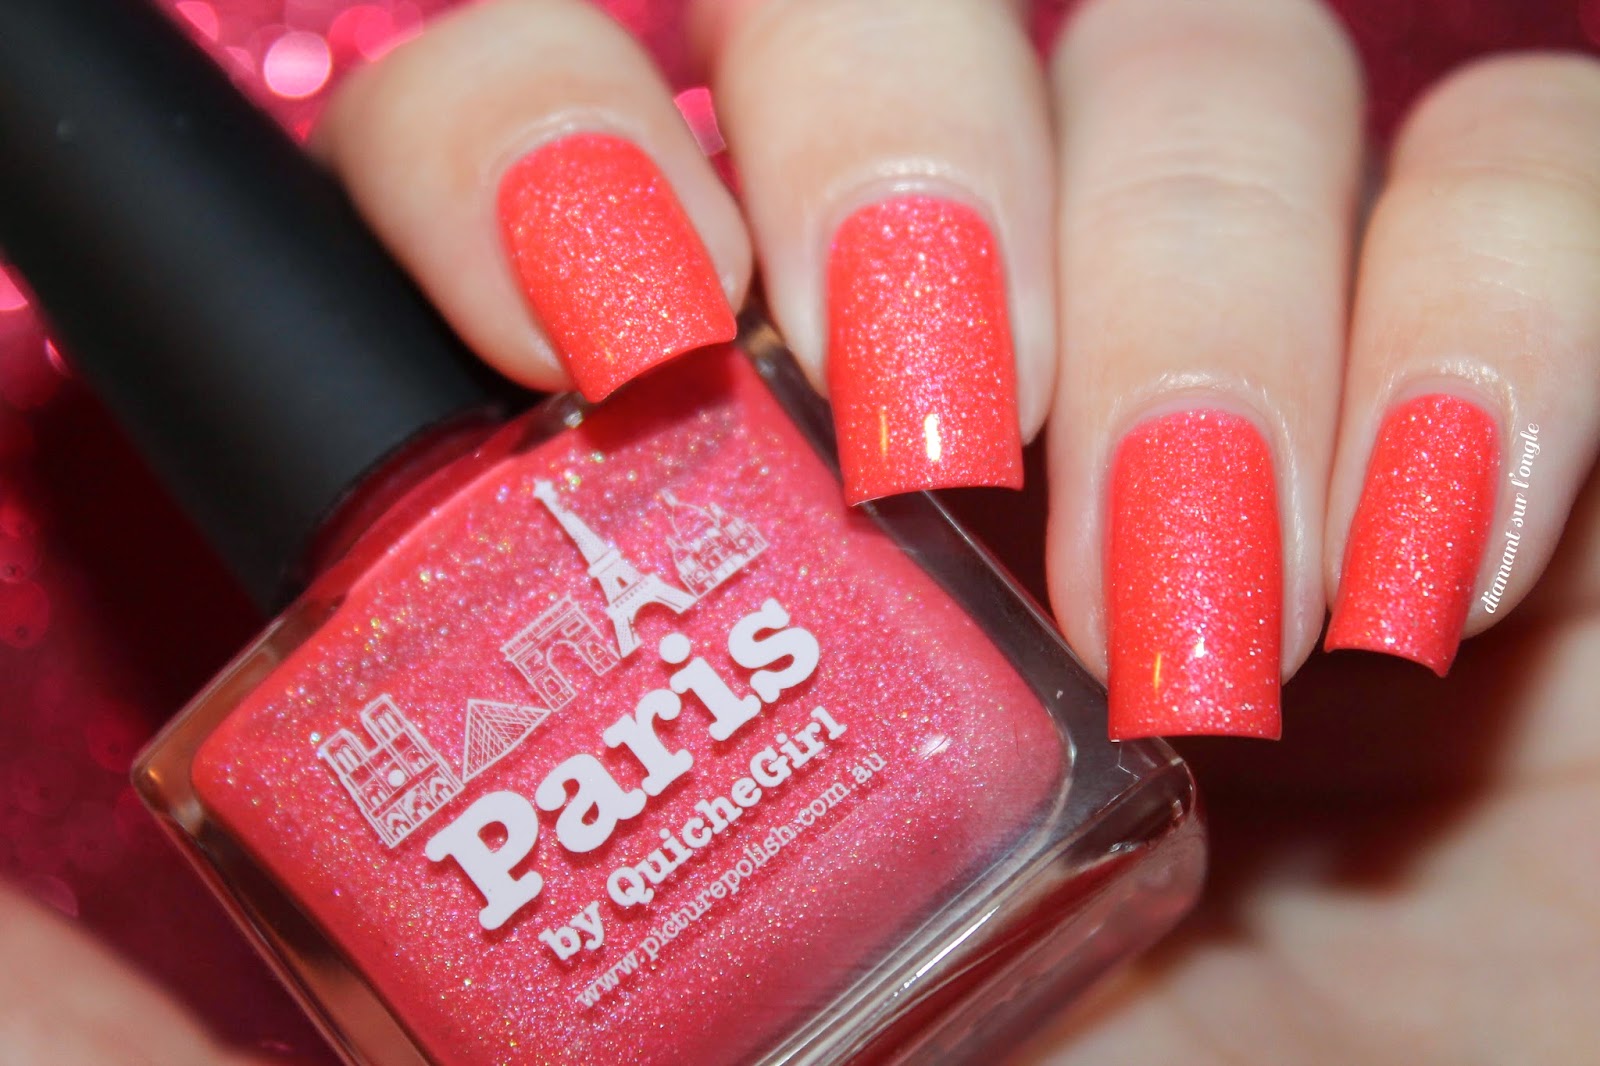 Swatch of the nail polish "Paris" from Picture Polish